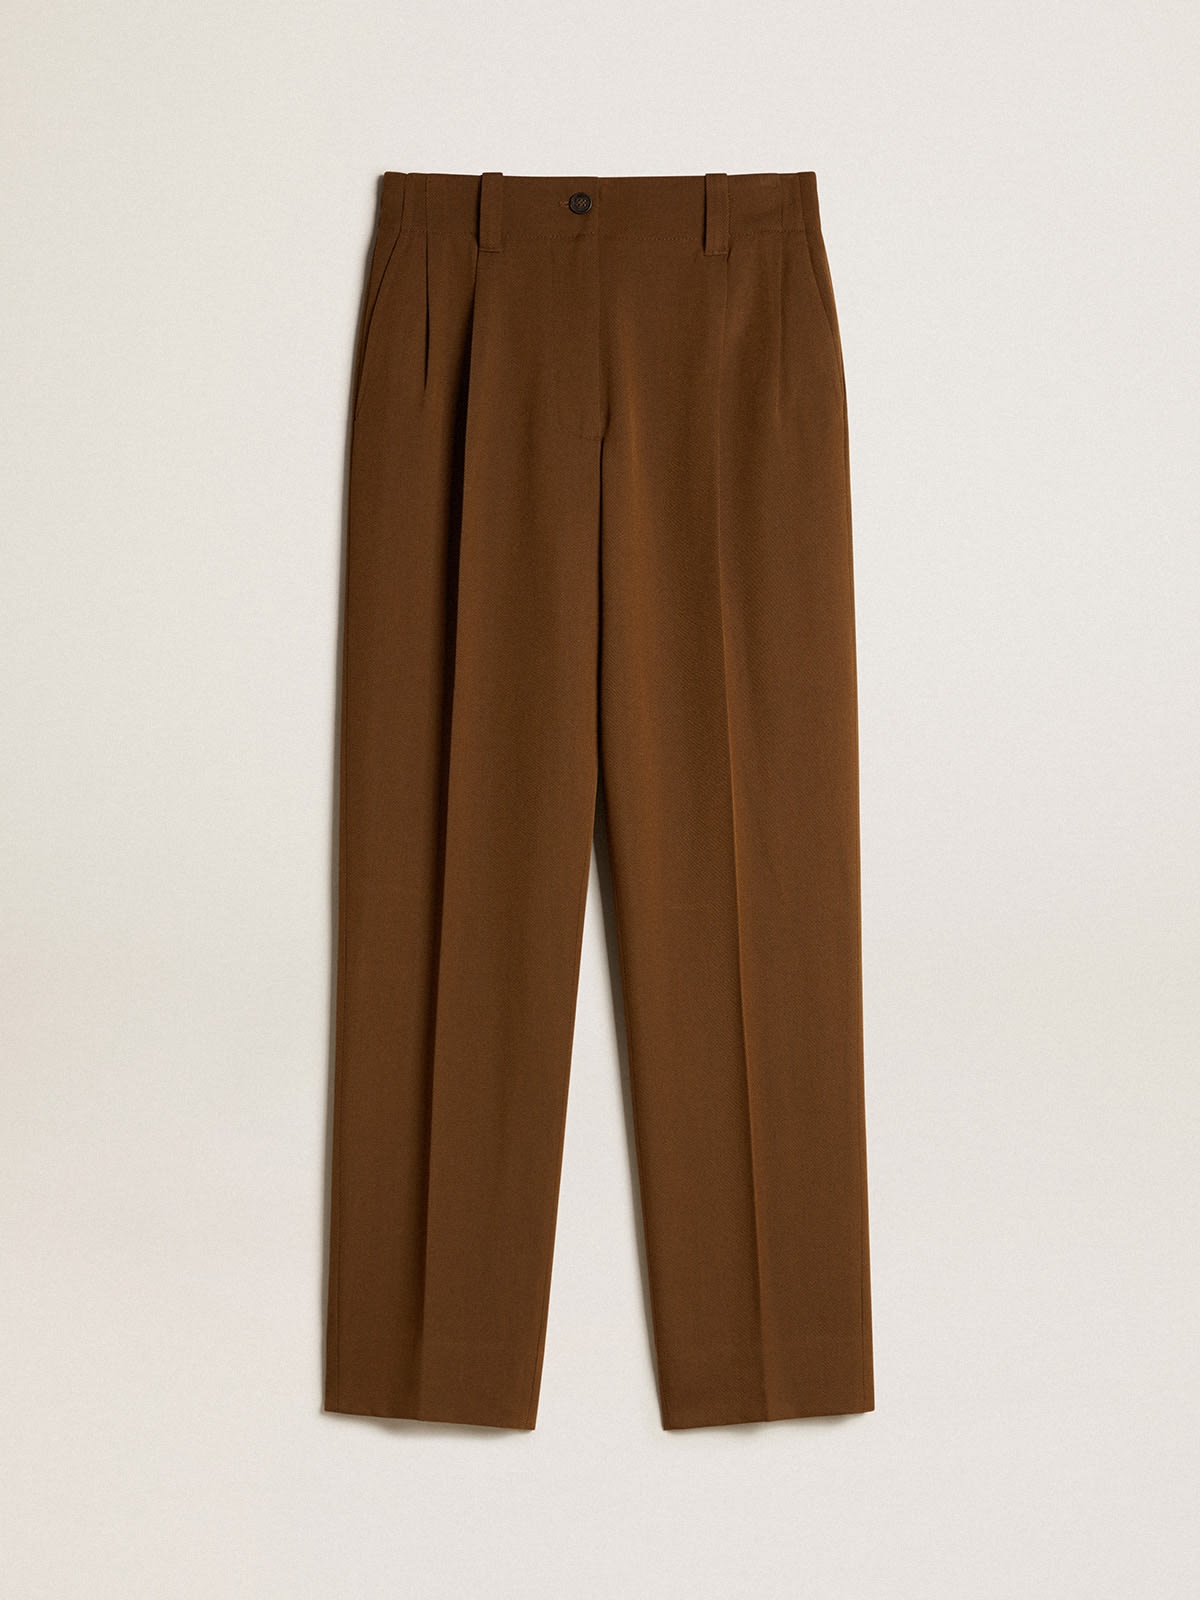 Beech-colored pants in wool and viscose blend - 1